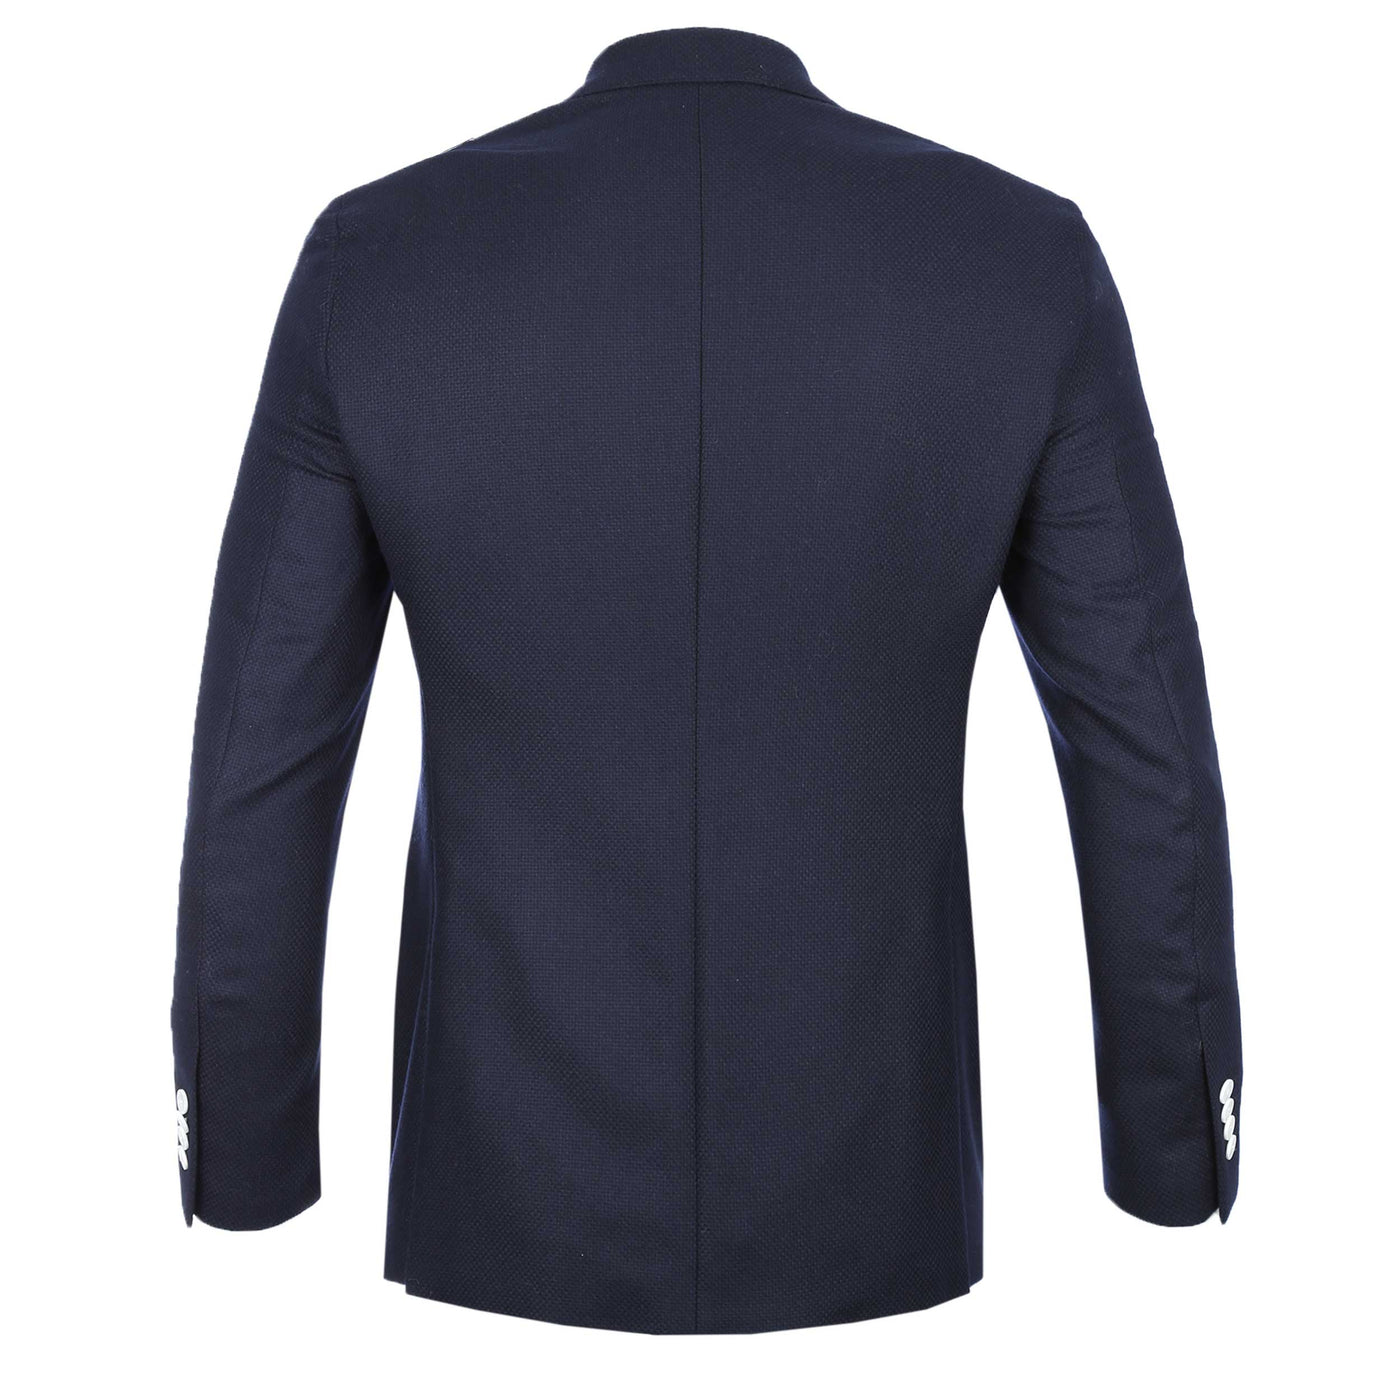 Norton Barrie Bespoke Jacket in Navy with White Buttons Back